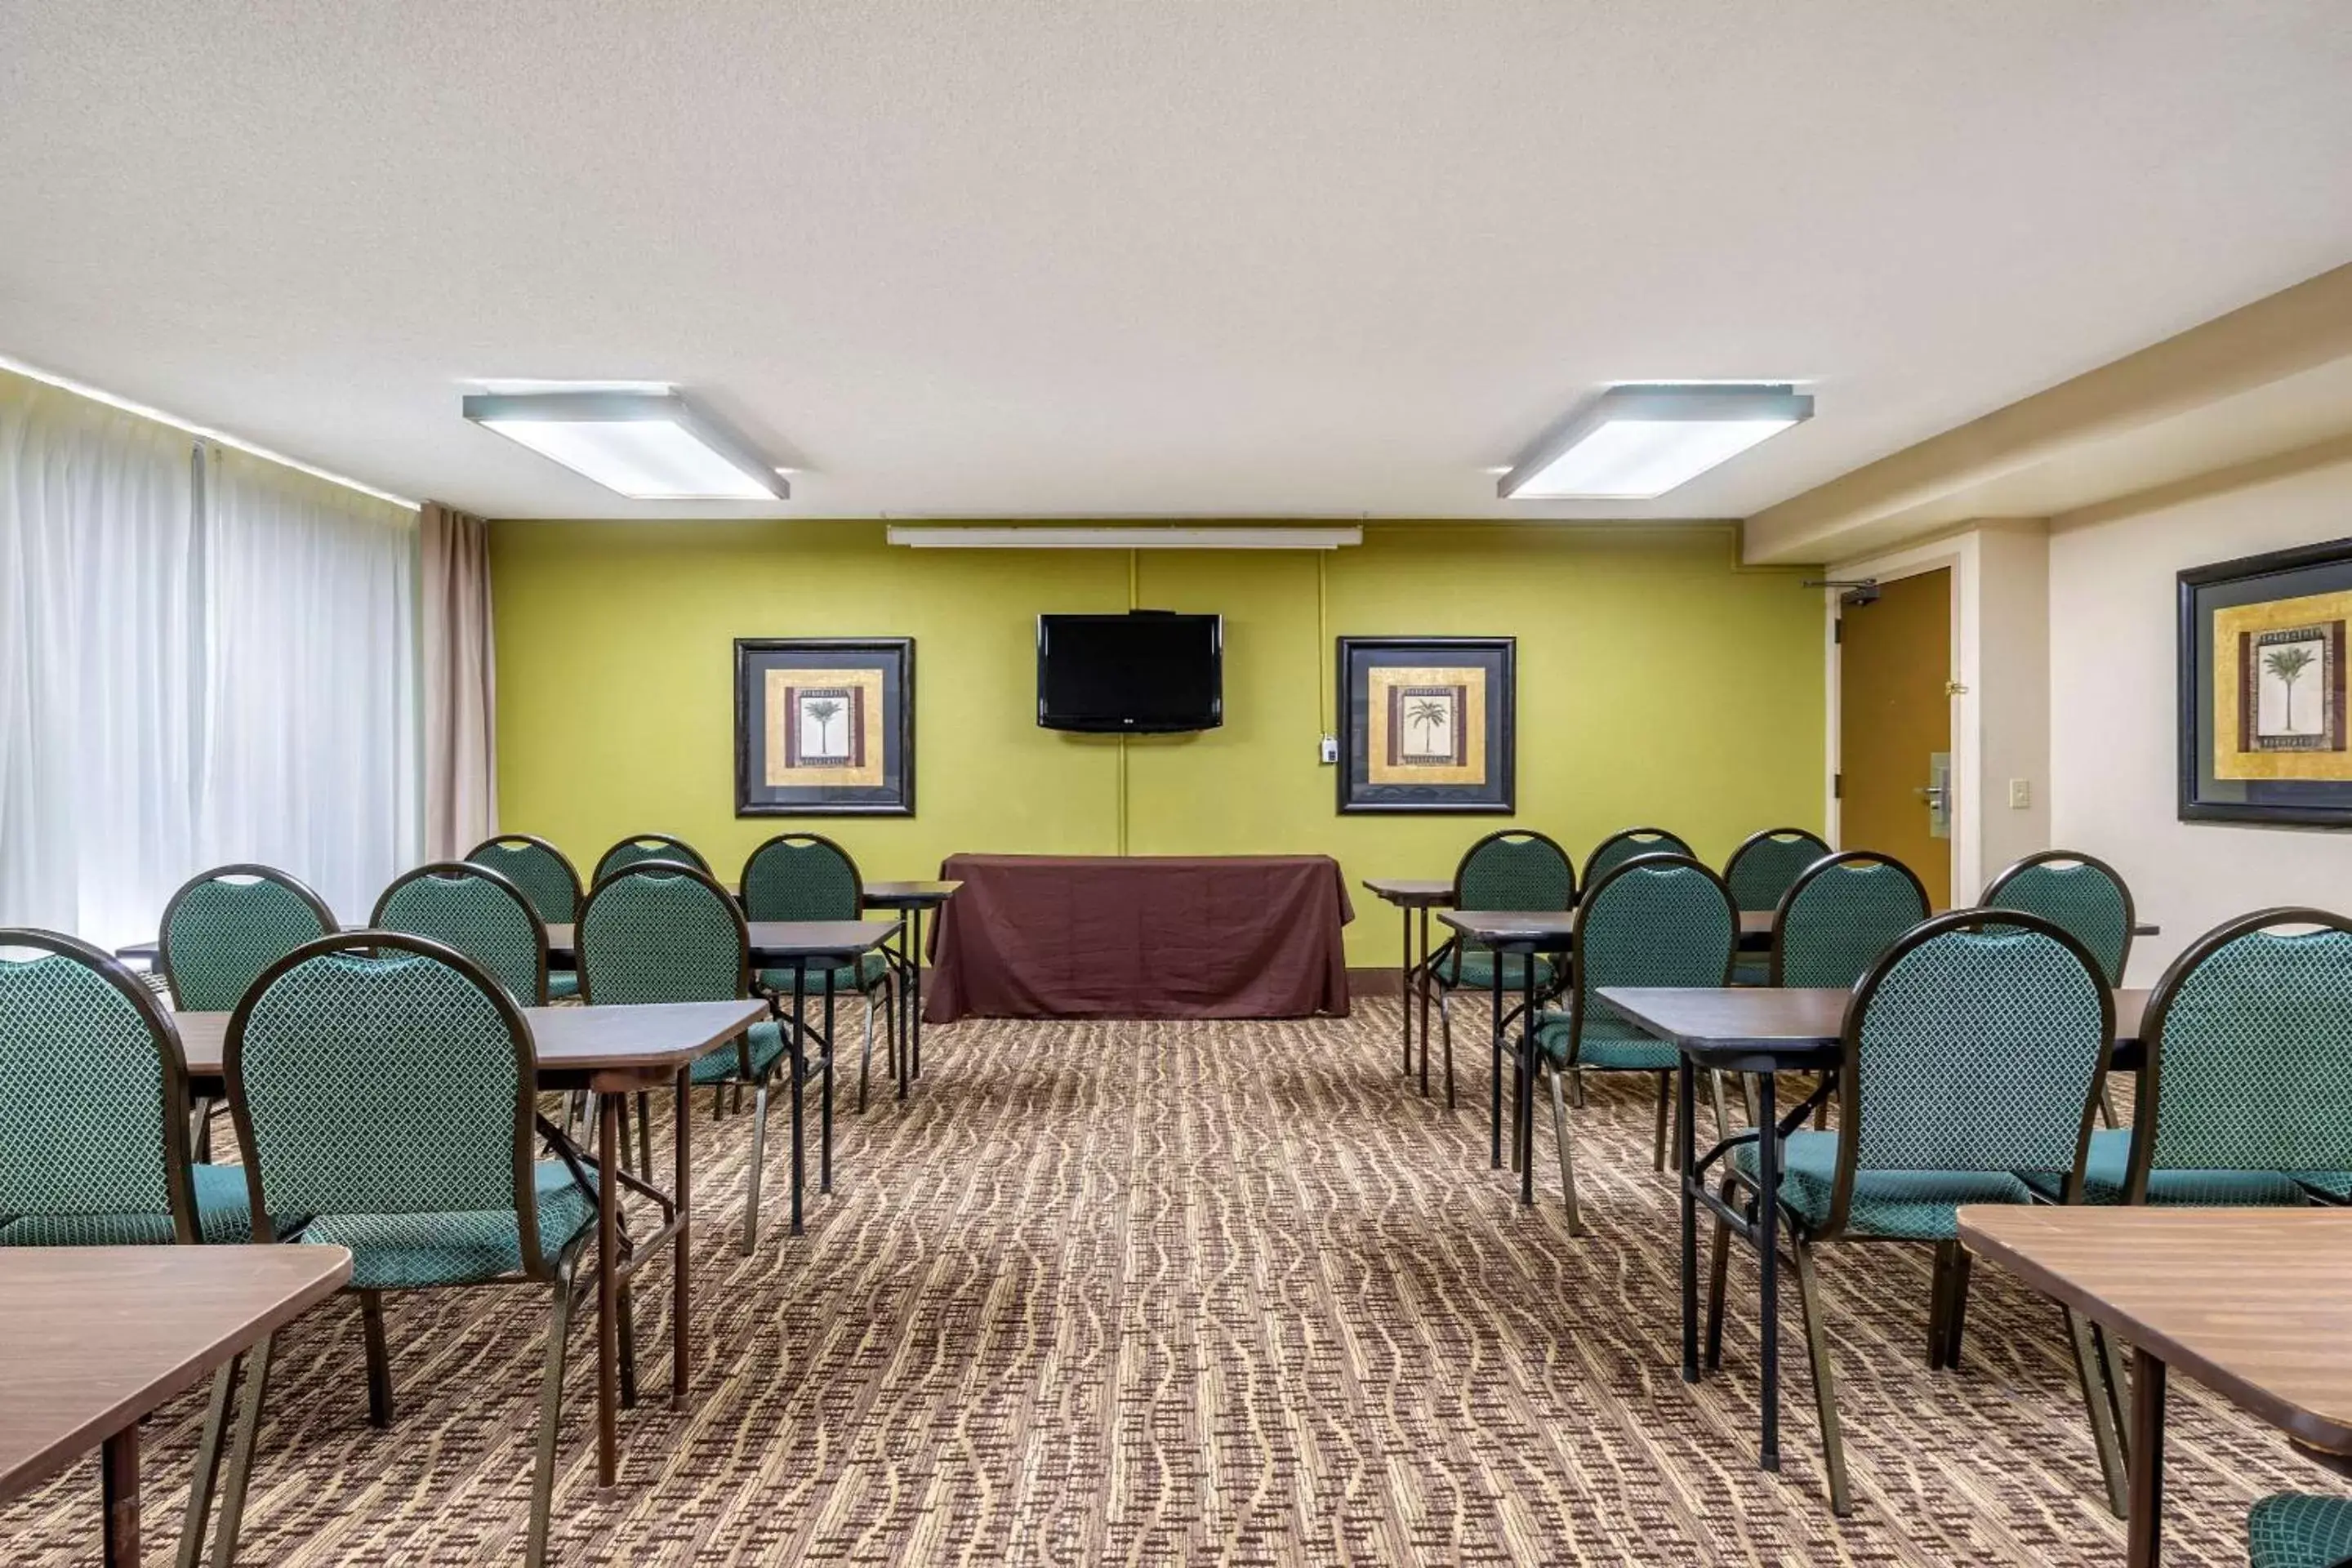 On site in Comfort Inn & Suites St Pete - Clearwater International Airport